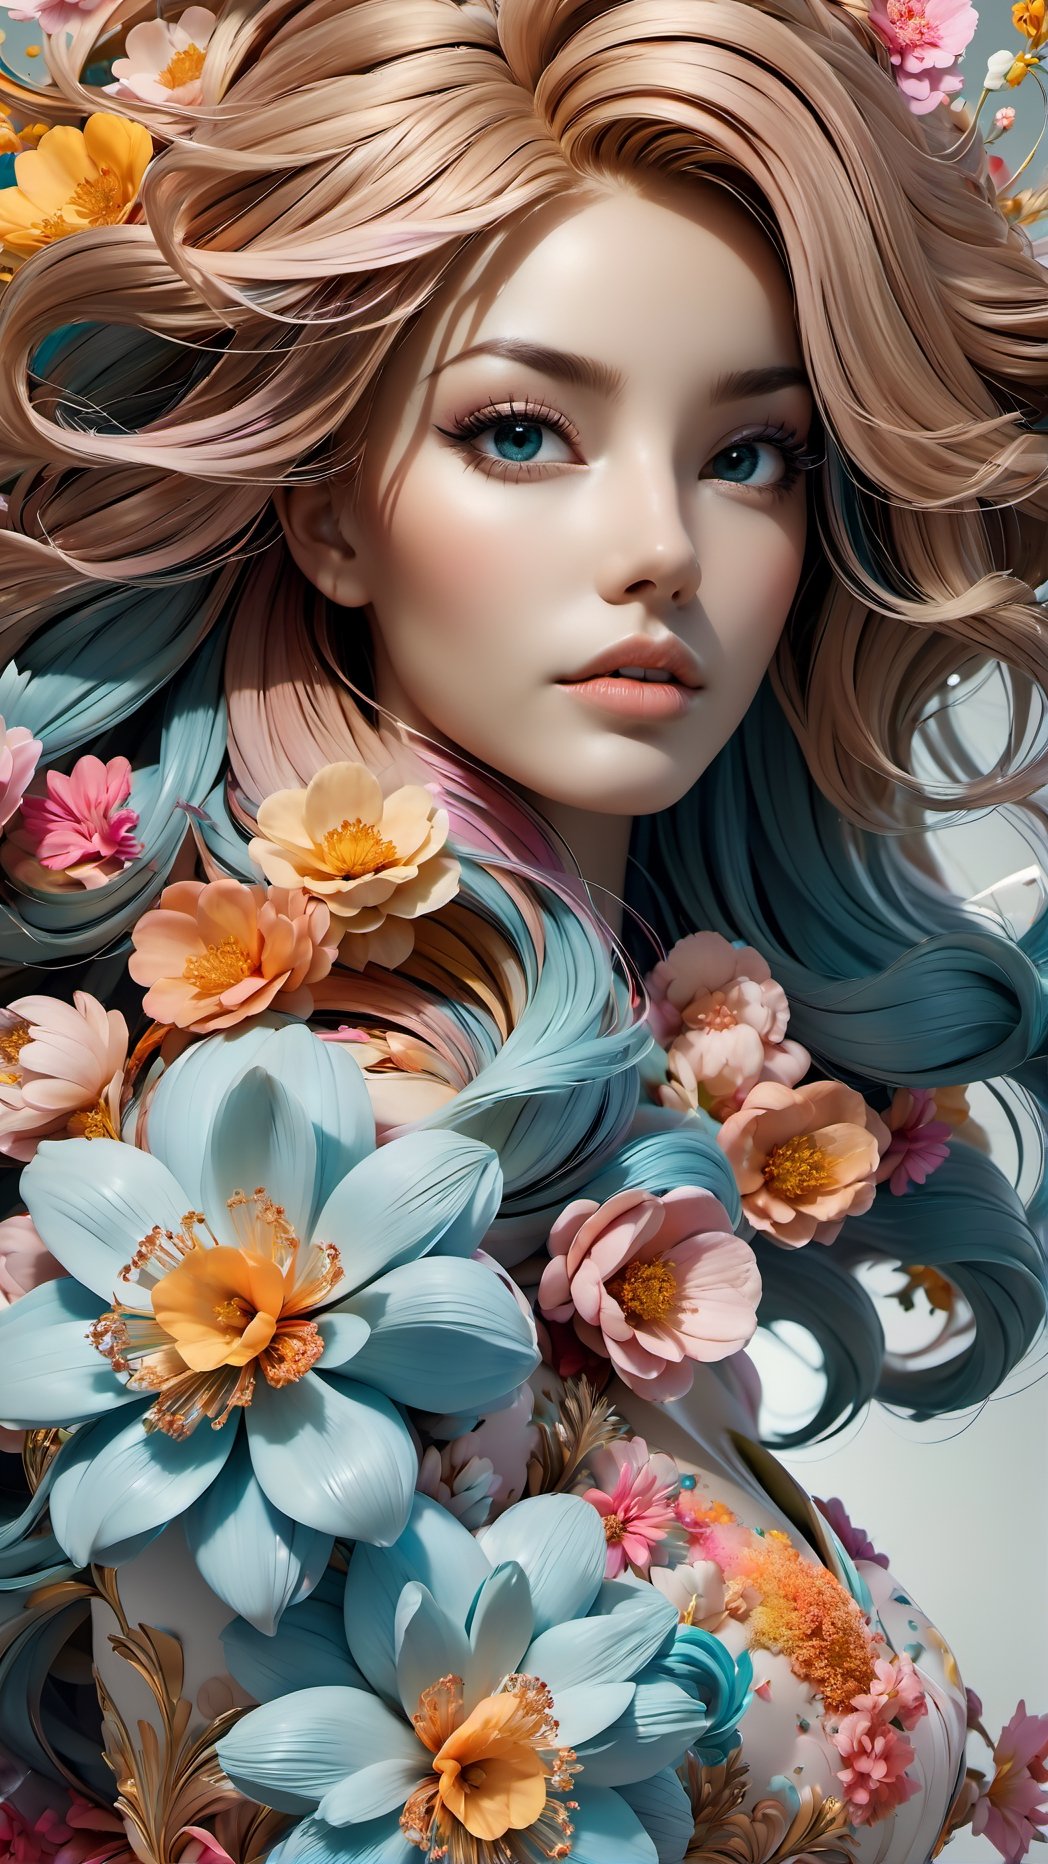 Intricate image of a Beautiful floral woman with flowy flowe-like hair, work of beauty and complexity, hyperdetailed facial features, 8k UHD, close-up, alberto seveso style 